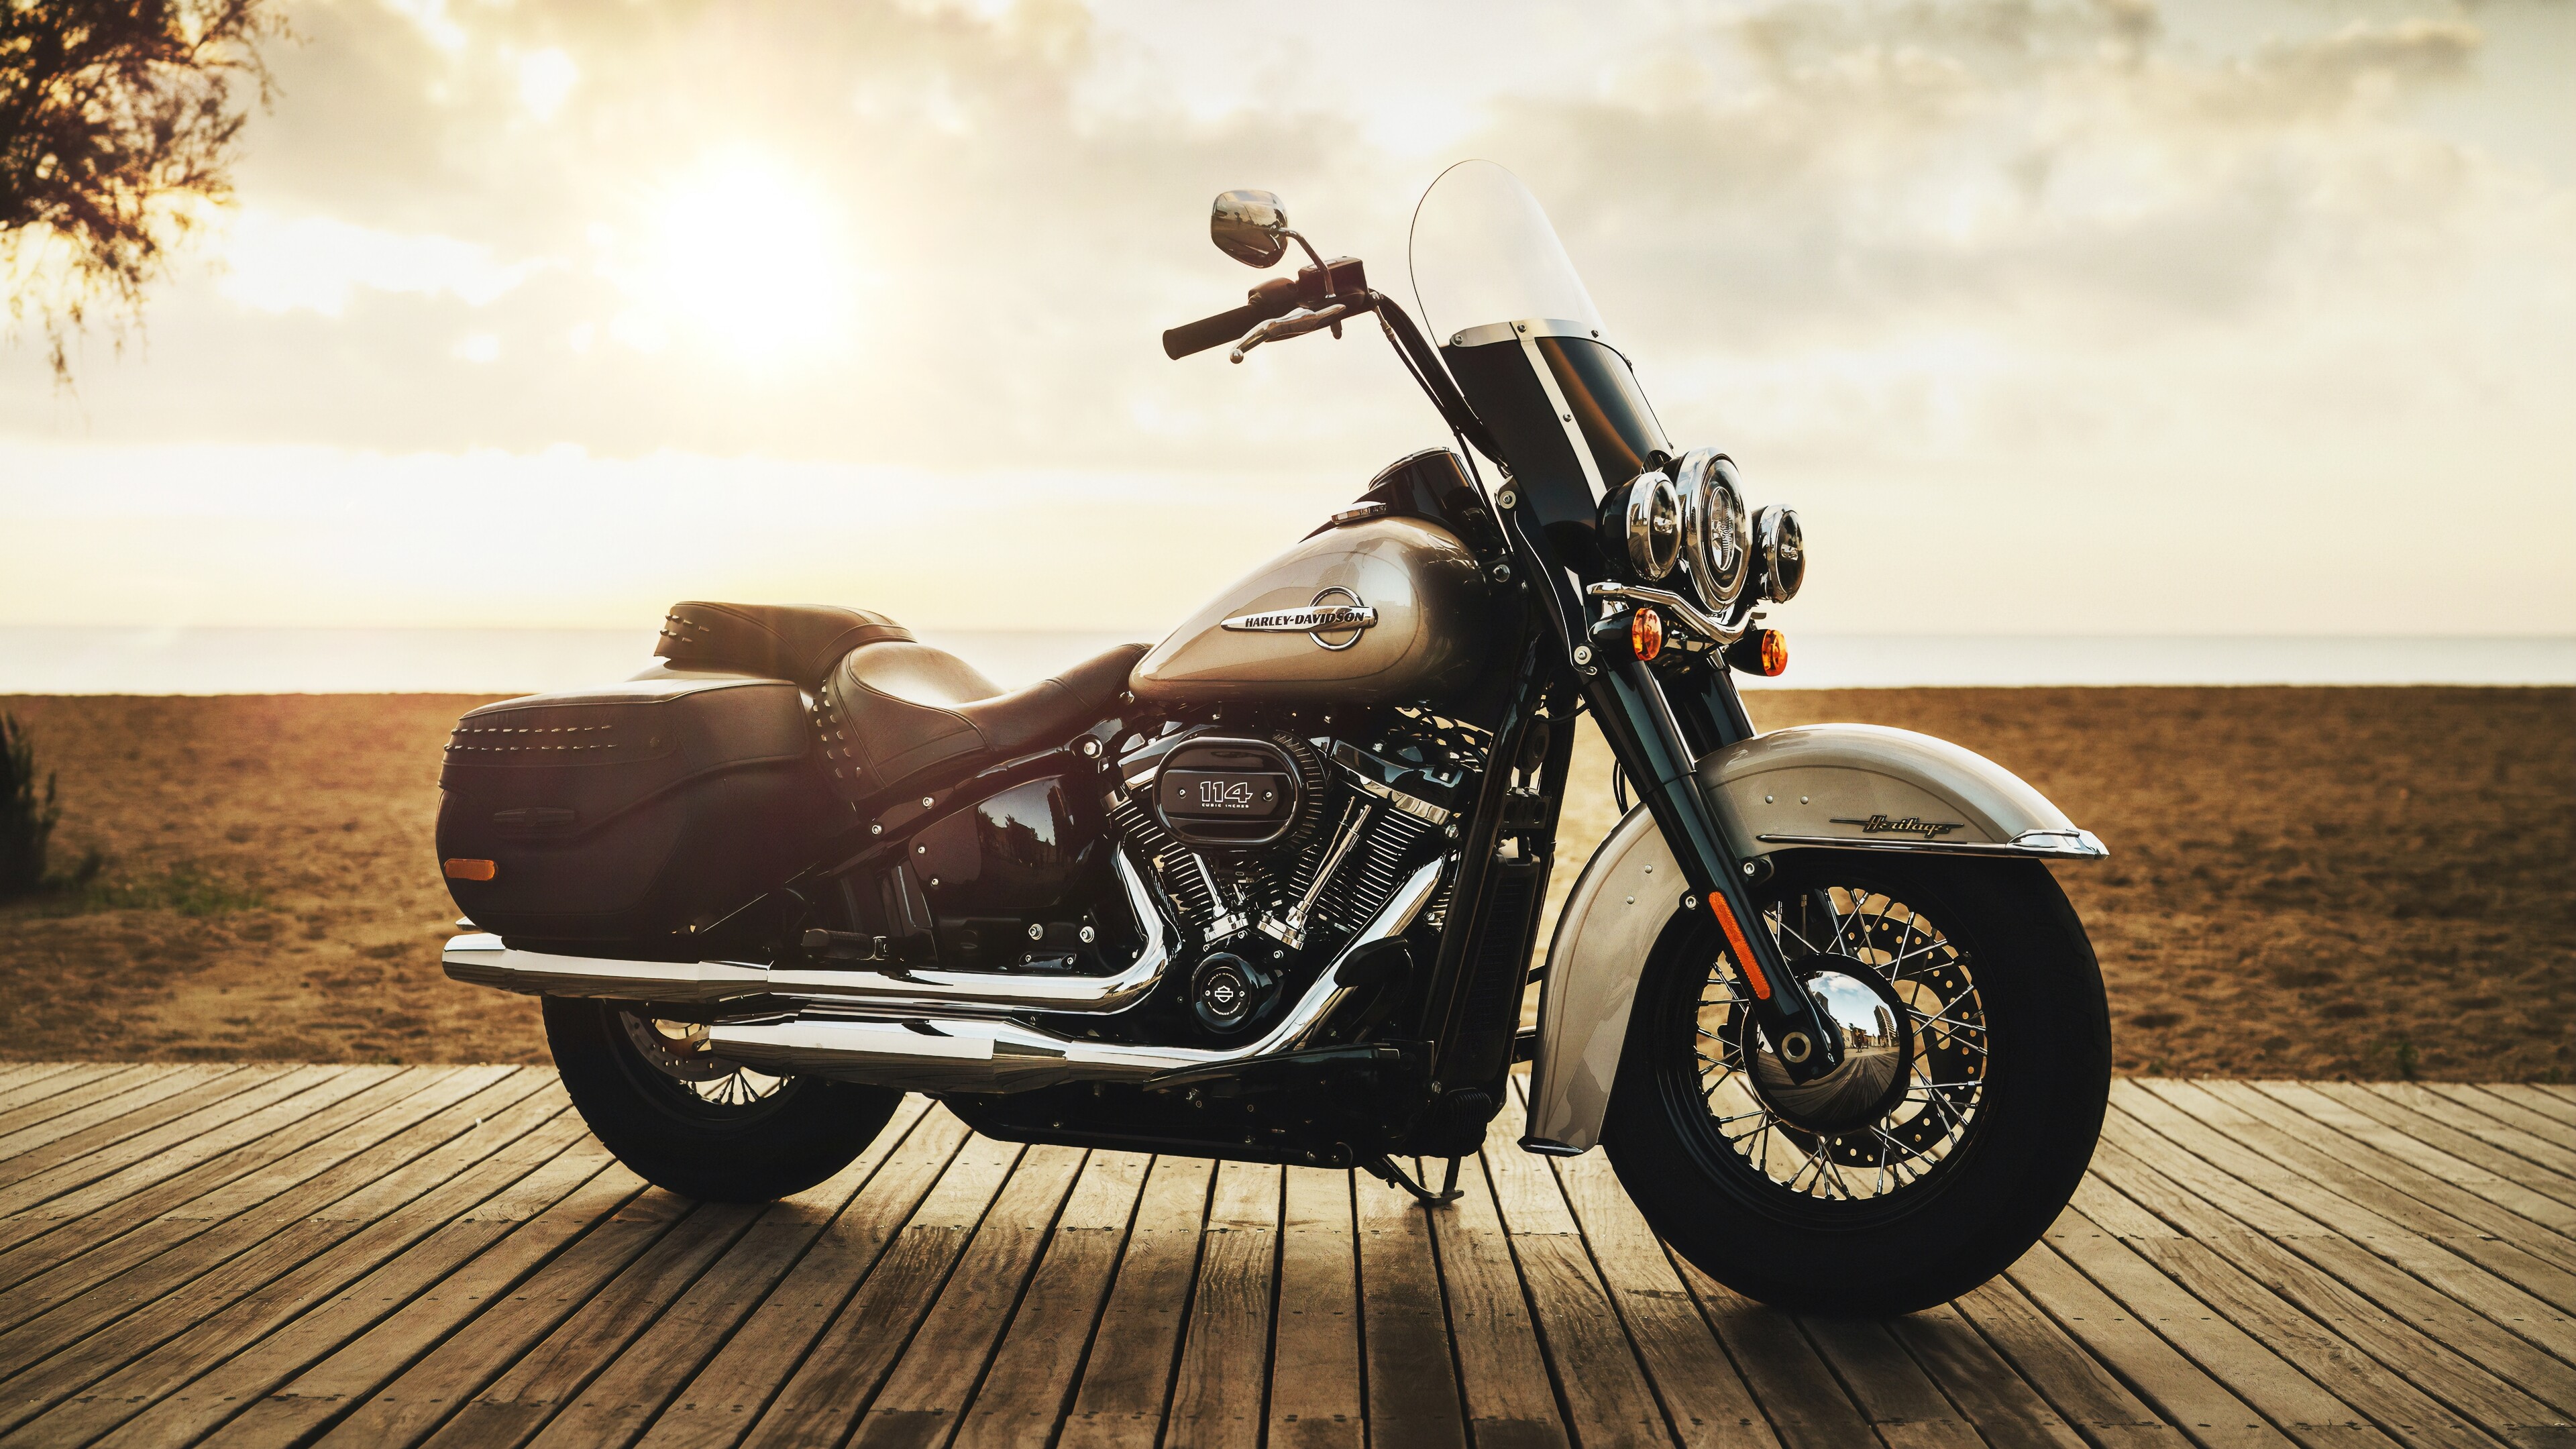 Harley-Davidson: One of two major American motorcycle manufacturers, founded in 1903. 3840x2160 4K Background.